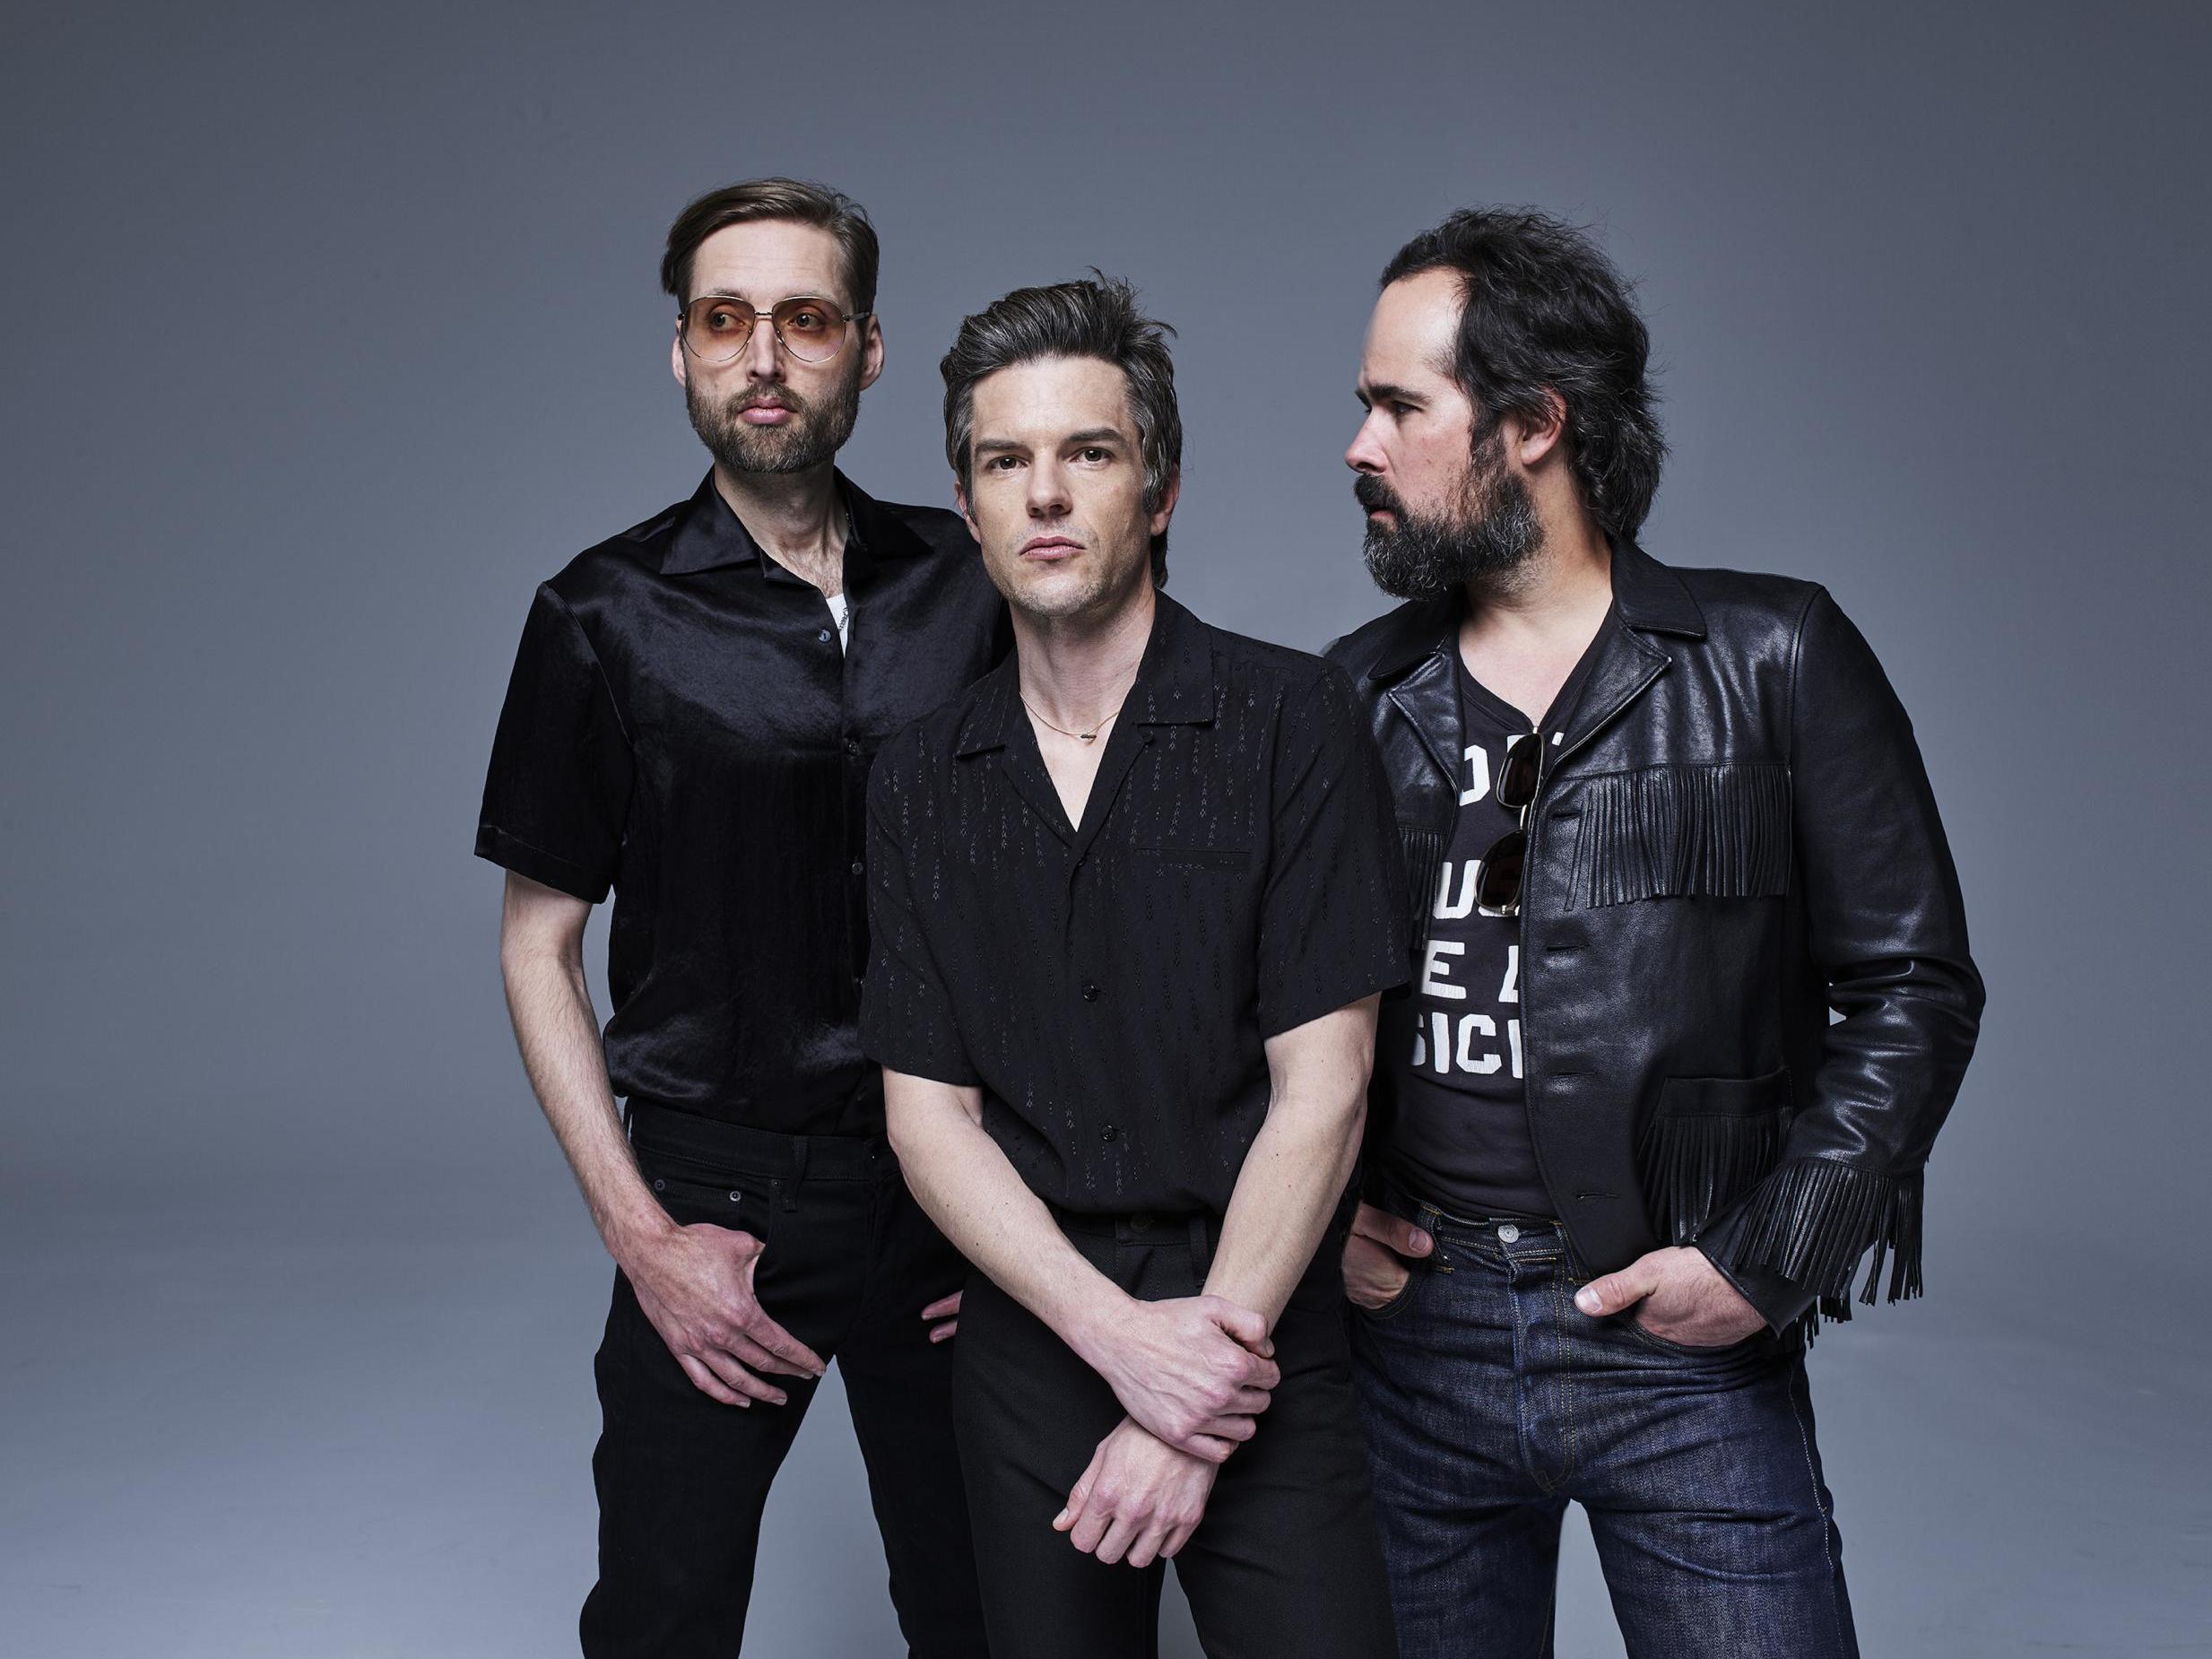 The Killers (from left, Mark Stoermer, Brandon Flowers and Ronnie Vannucci) embrace contemporary alt-pop influences on their new album ‘Imploding the Mirage’